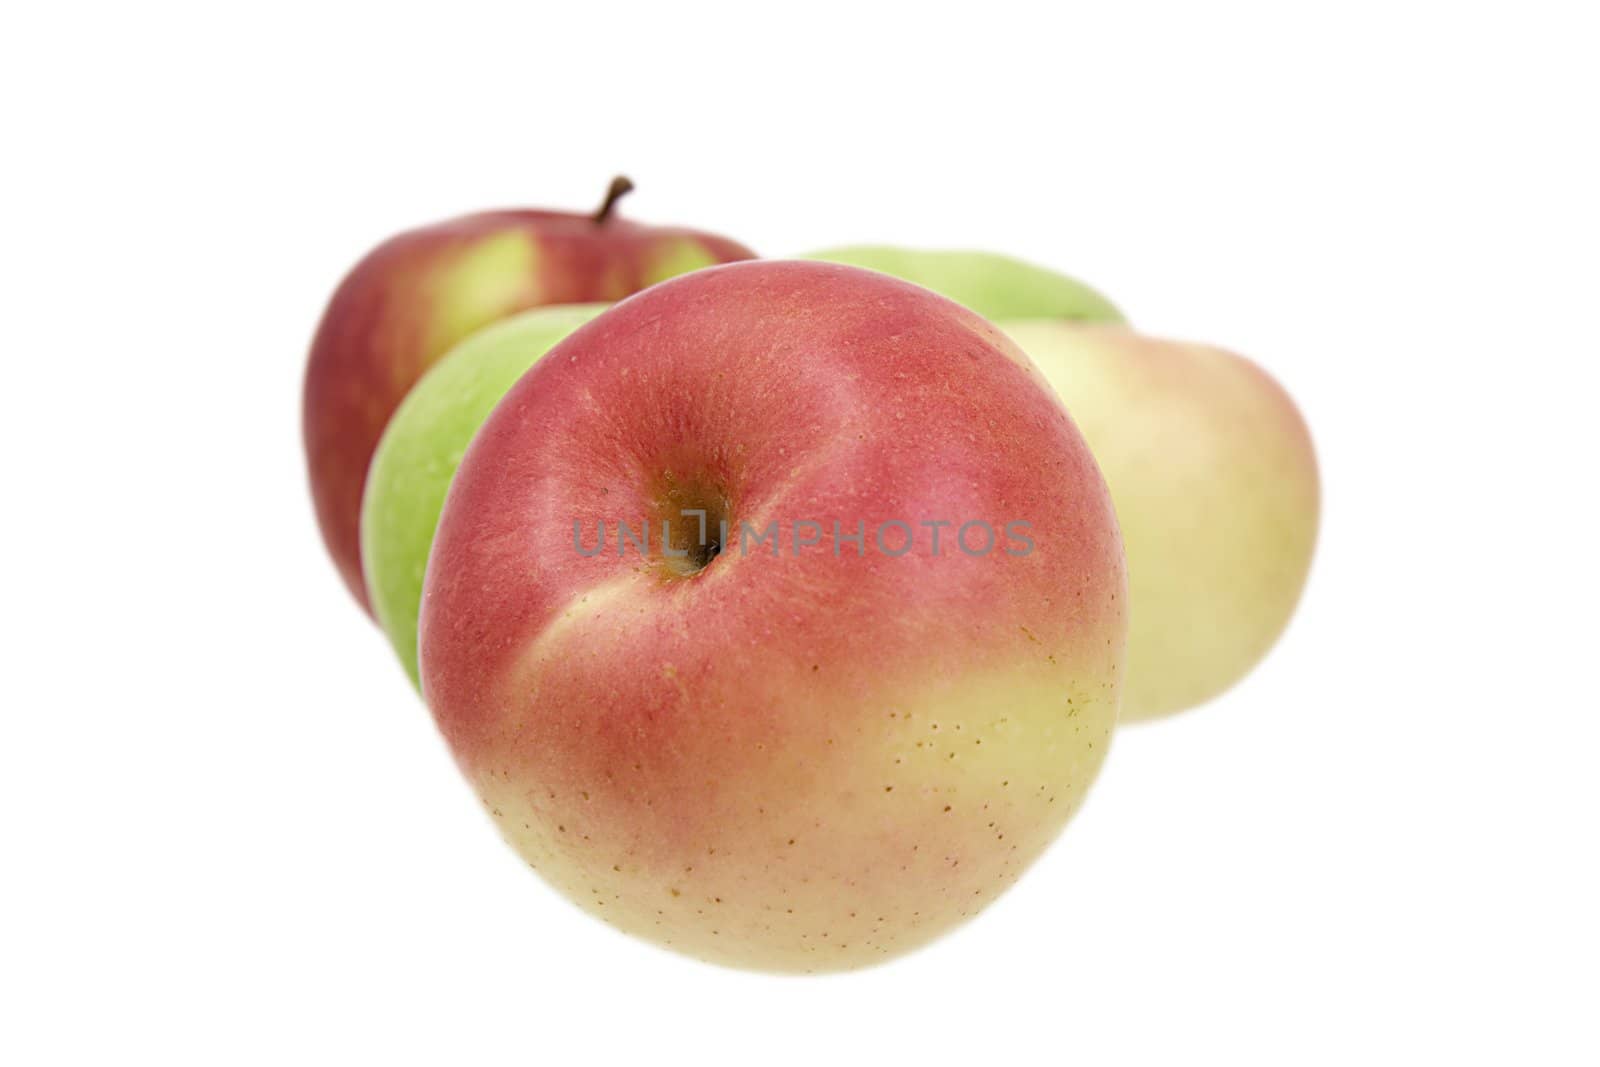 Green and red apples on a white background